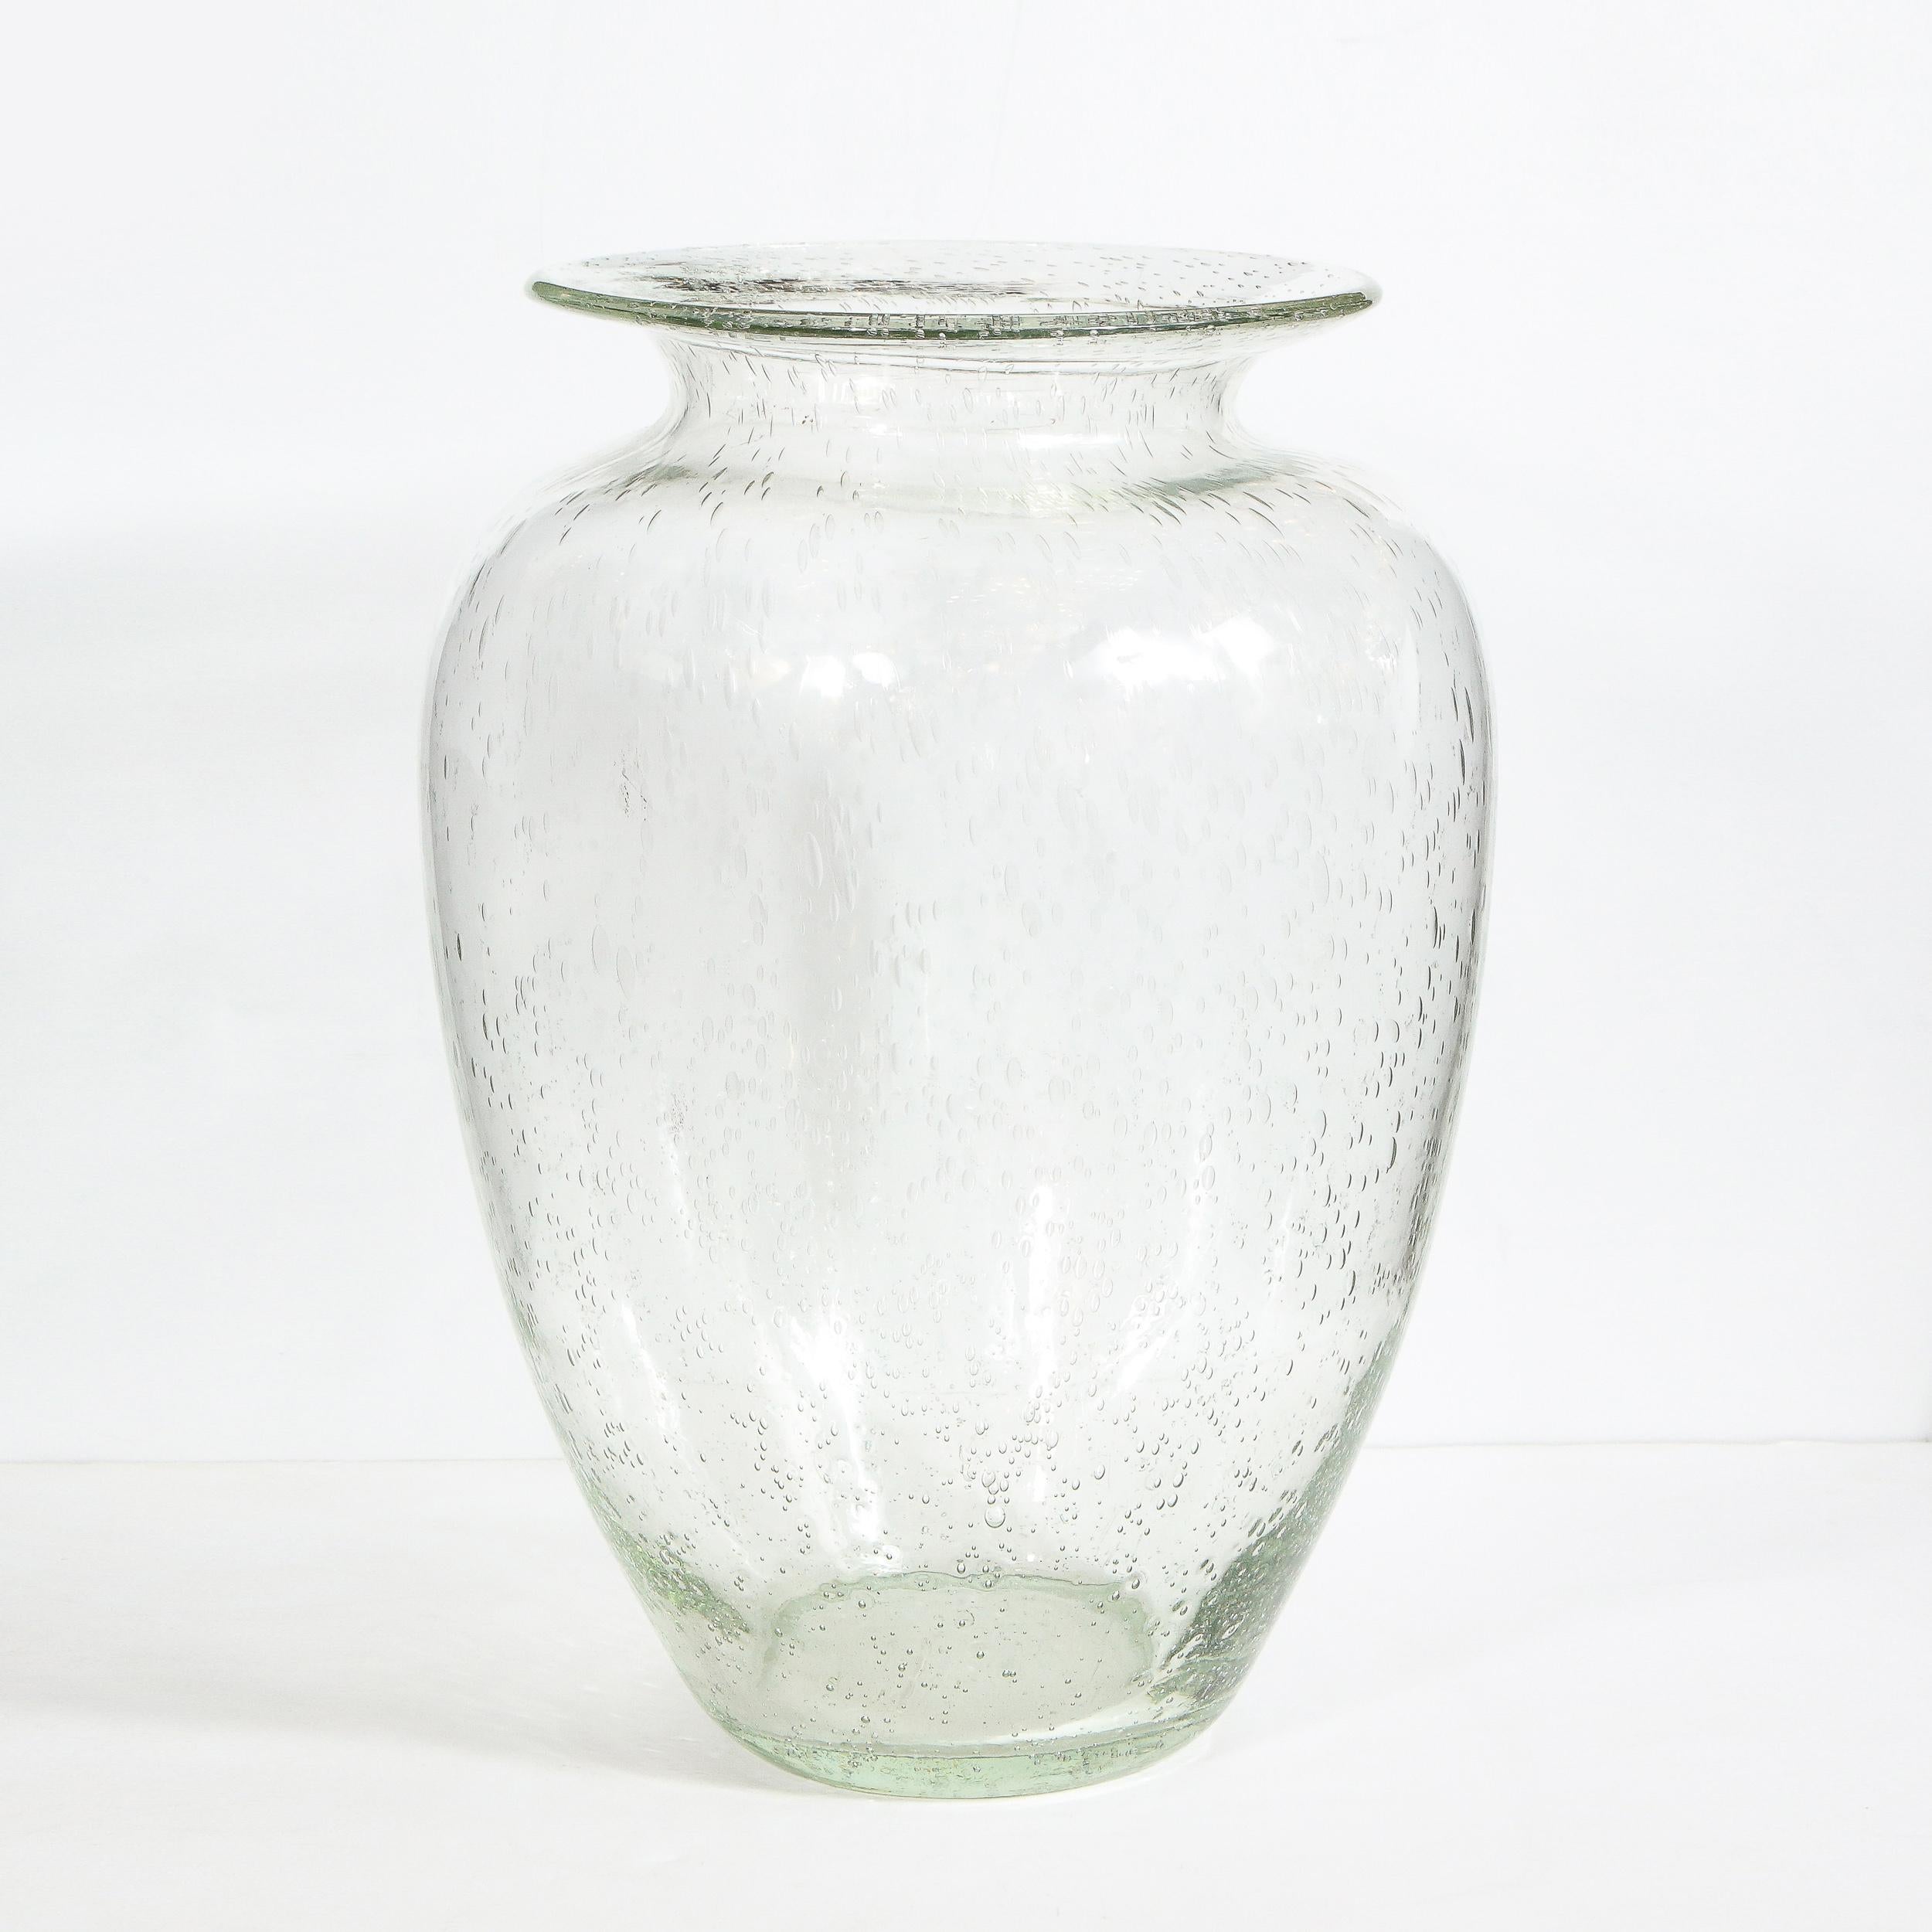 This beautiful modernist vase was hand blown in Murano, Italy- the island off the coast of Venice renowned for centuries for its superlative glass production. It offers a conical body that tapers to each end and flares out at the mouth- all realized